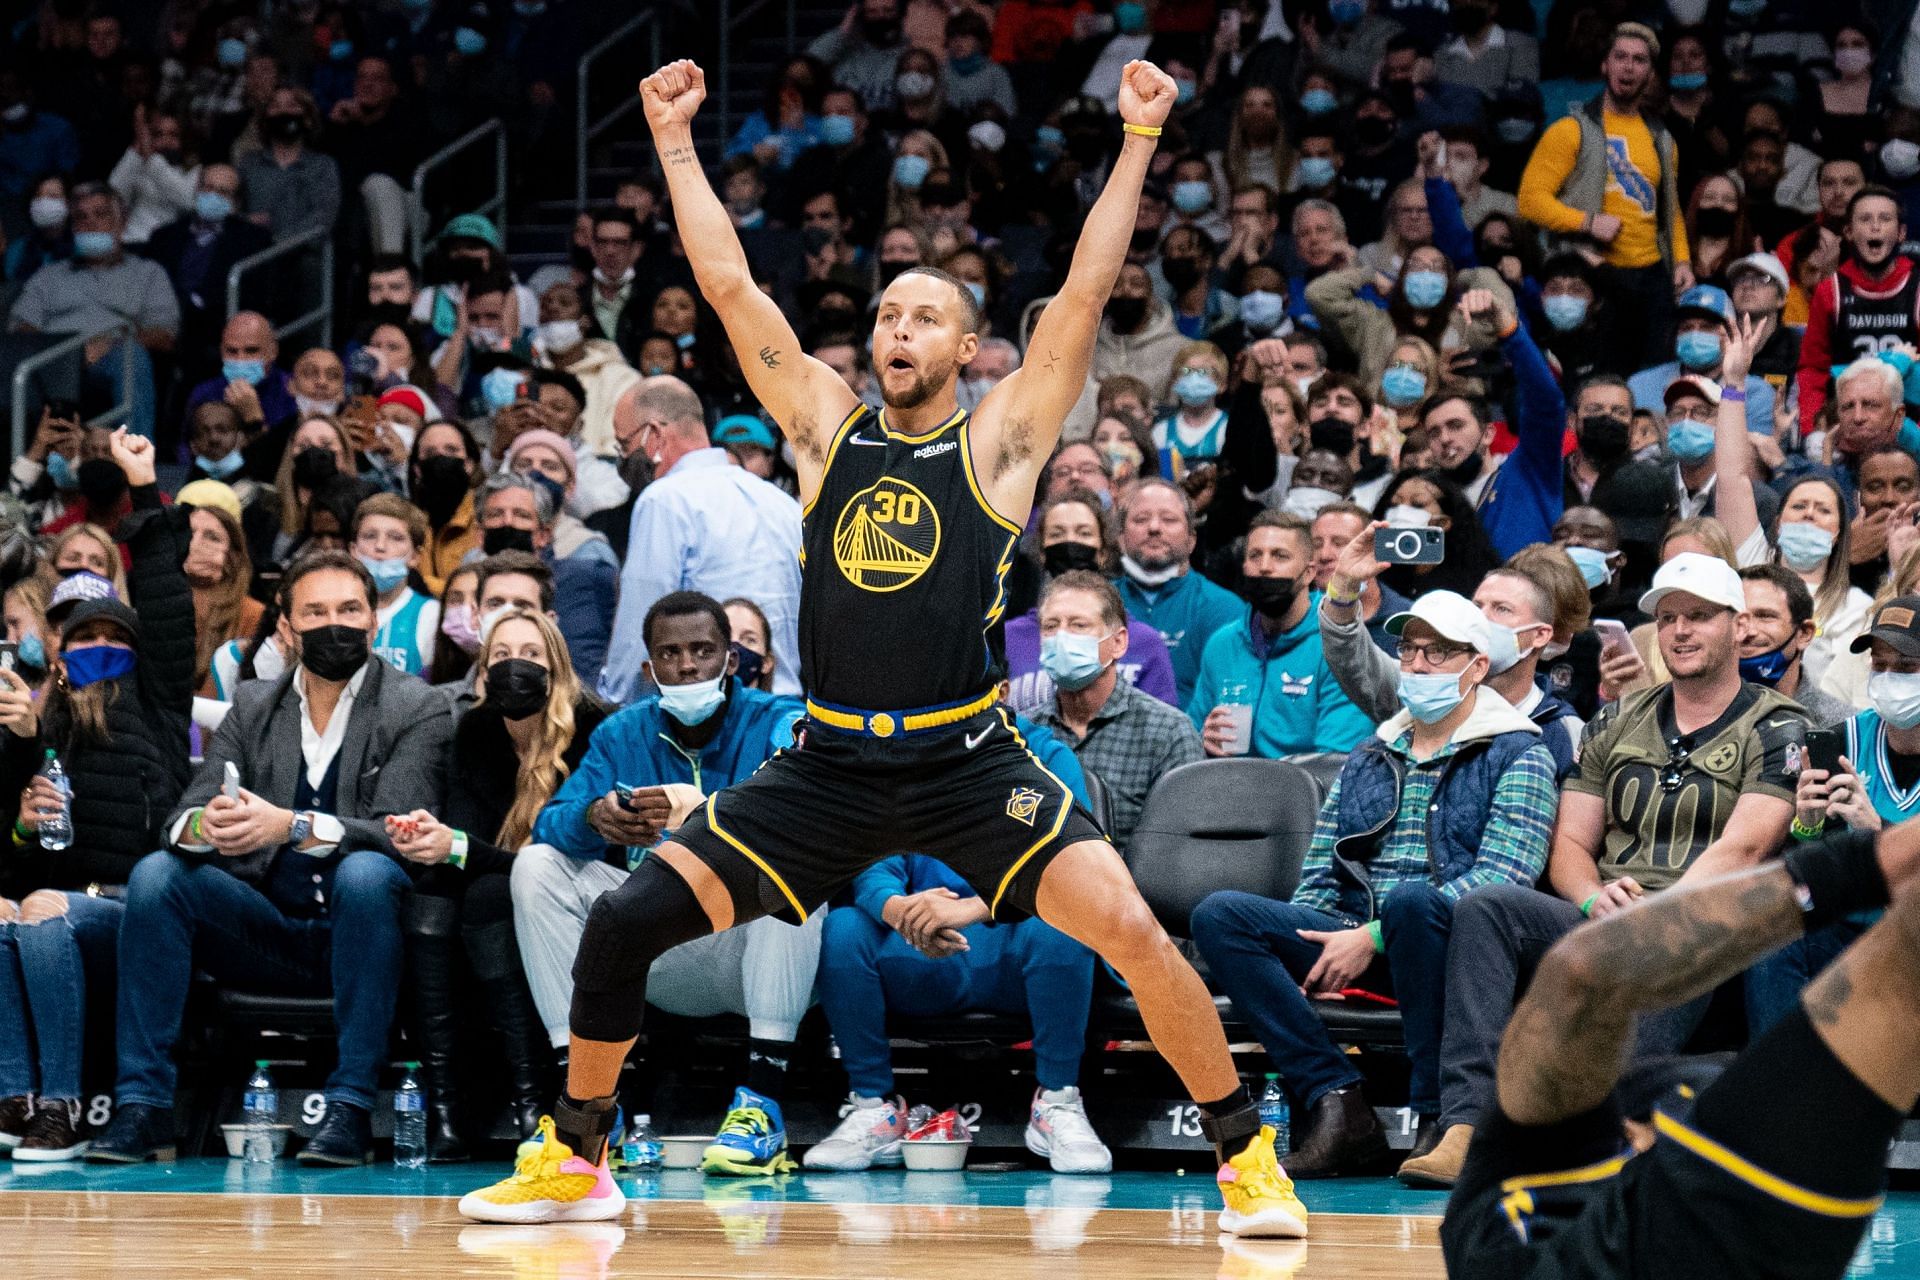 Golden State Warriors superstar Stephen Curry just became the second player in NBA history to make 2900 regular-season three-point shots